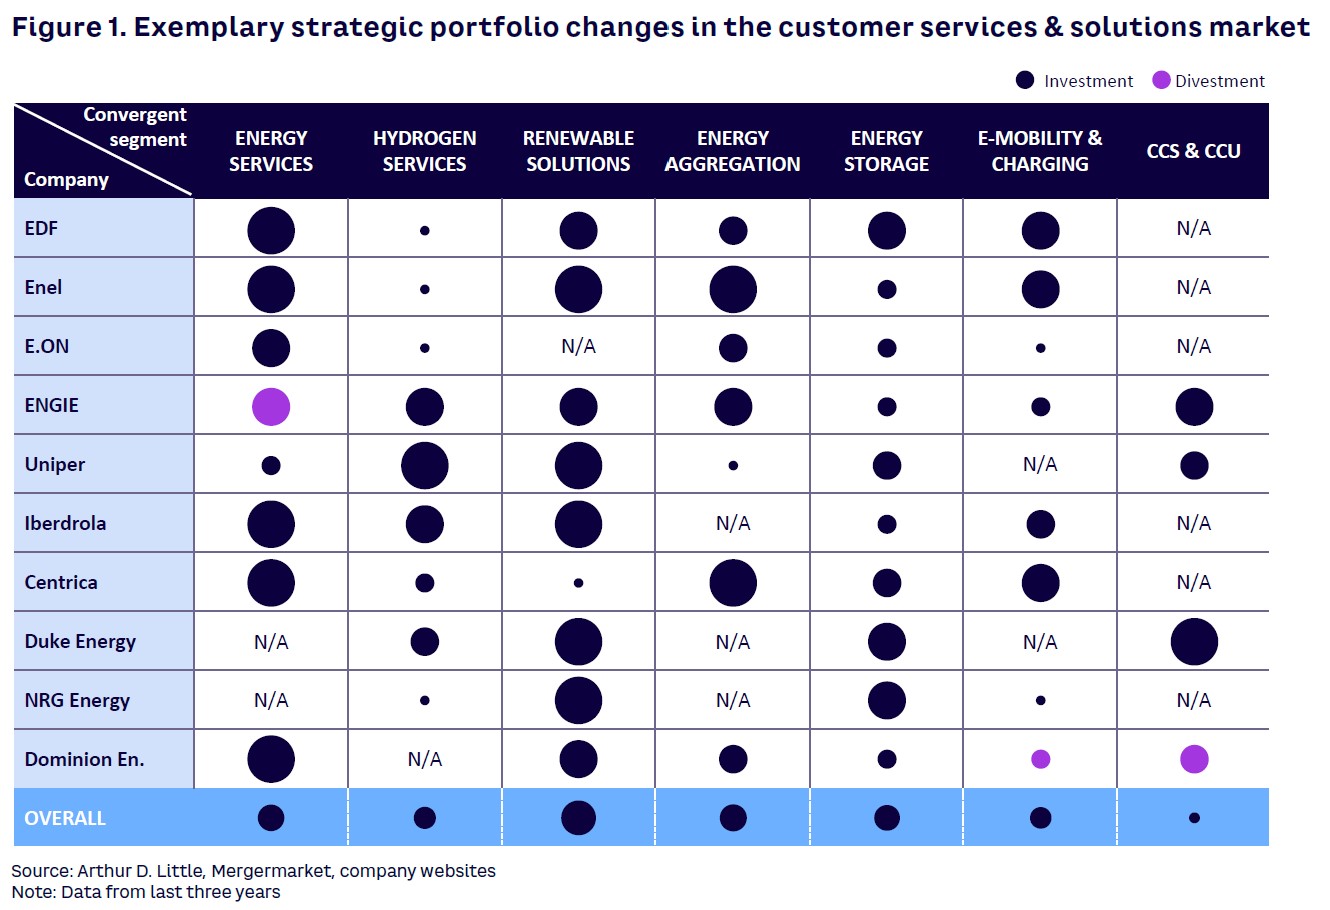 Figure 1. Exemplary strategic portfolio changes in the customer services & solutions market